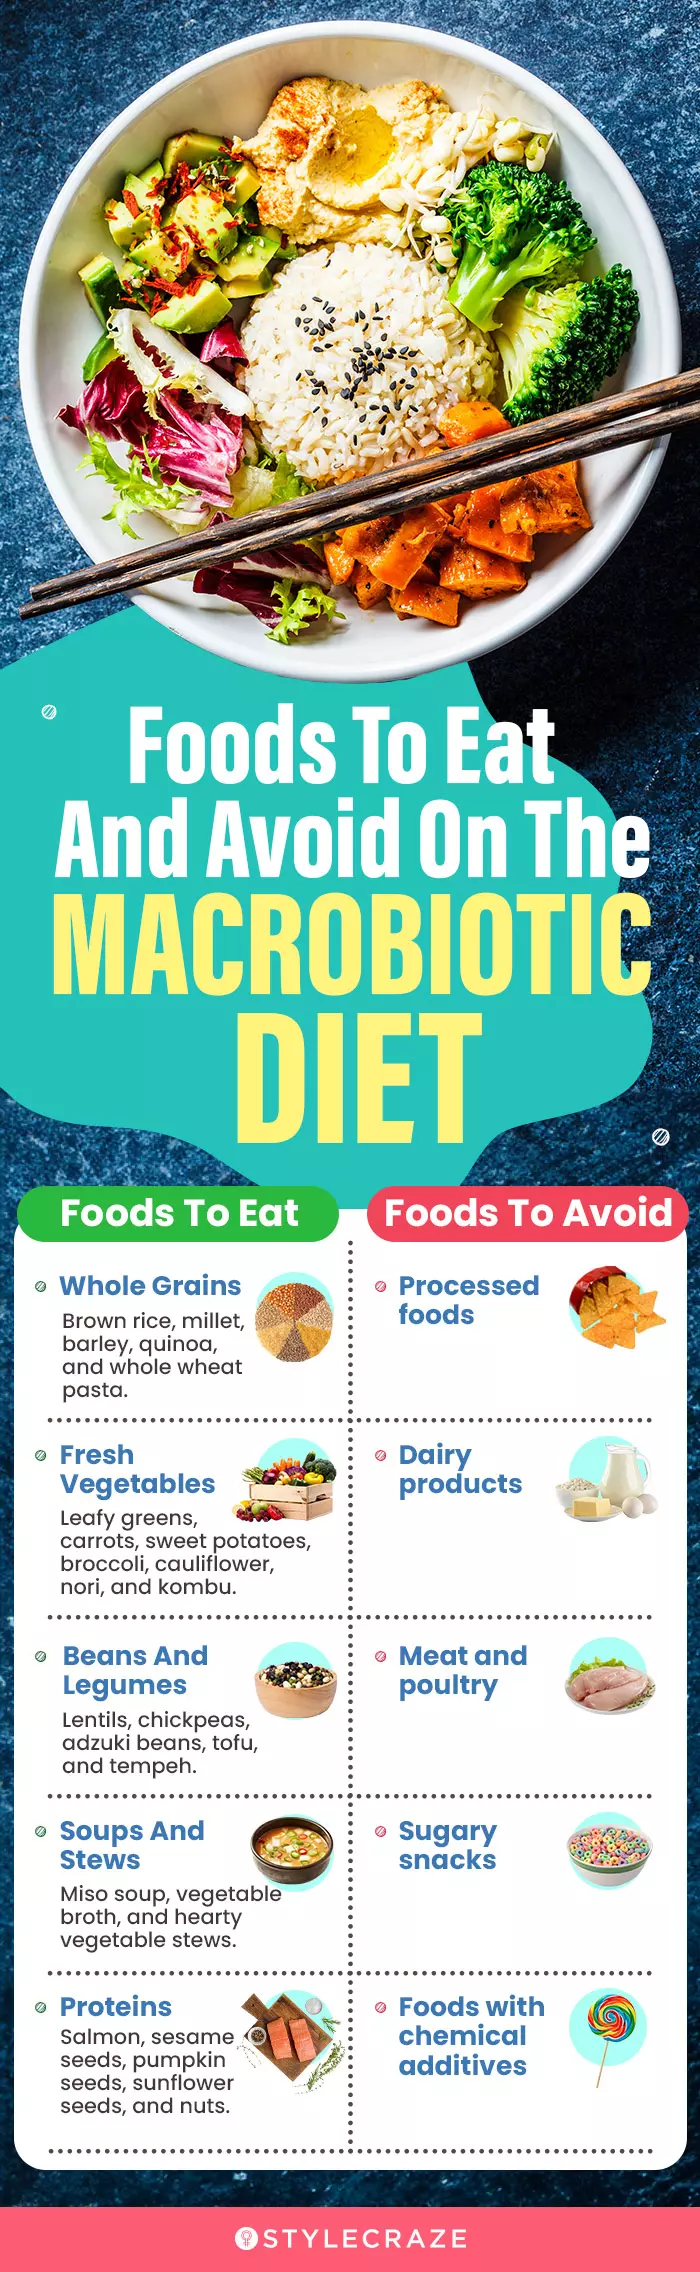 foods to eat and avoid on the macrobiotic diet (infographic)